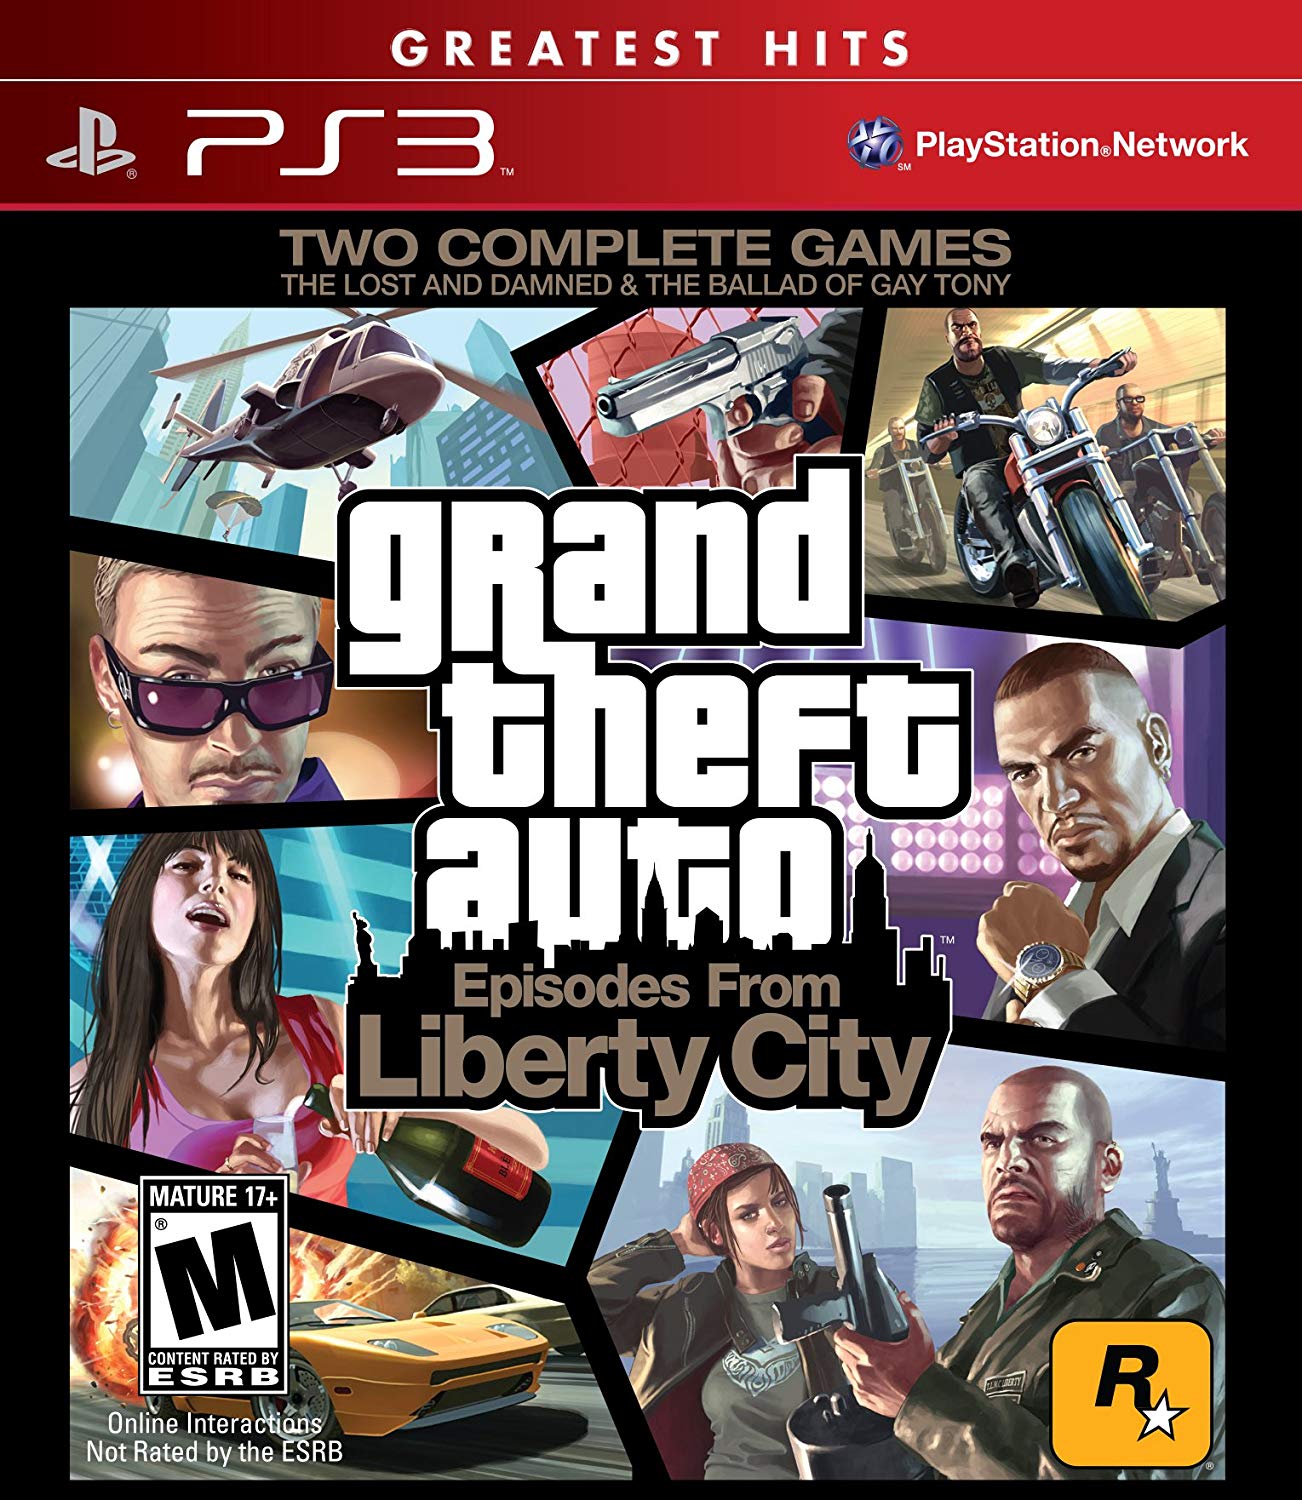 gta episodes from liberty city update